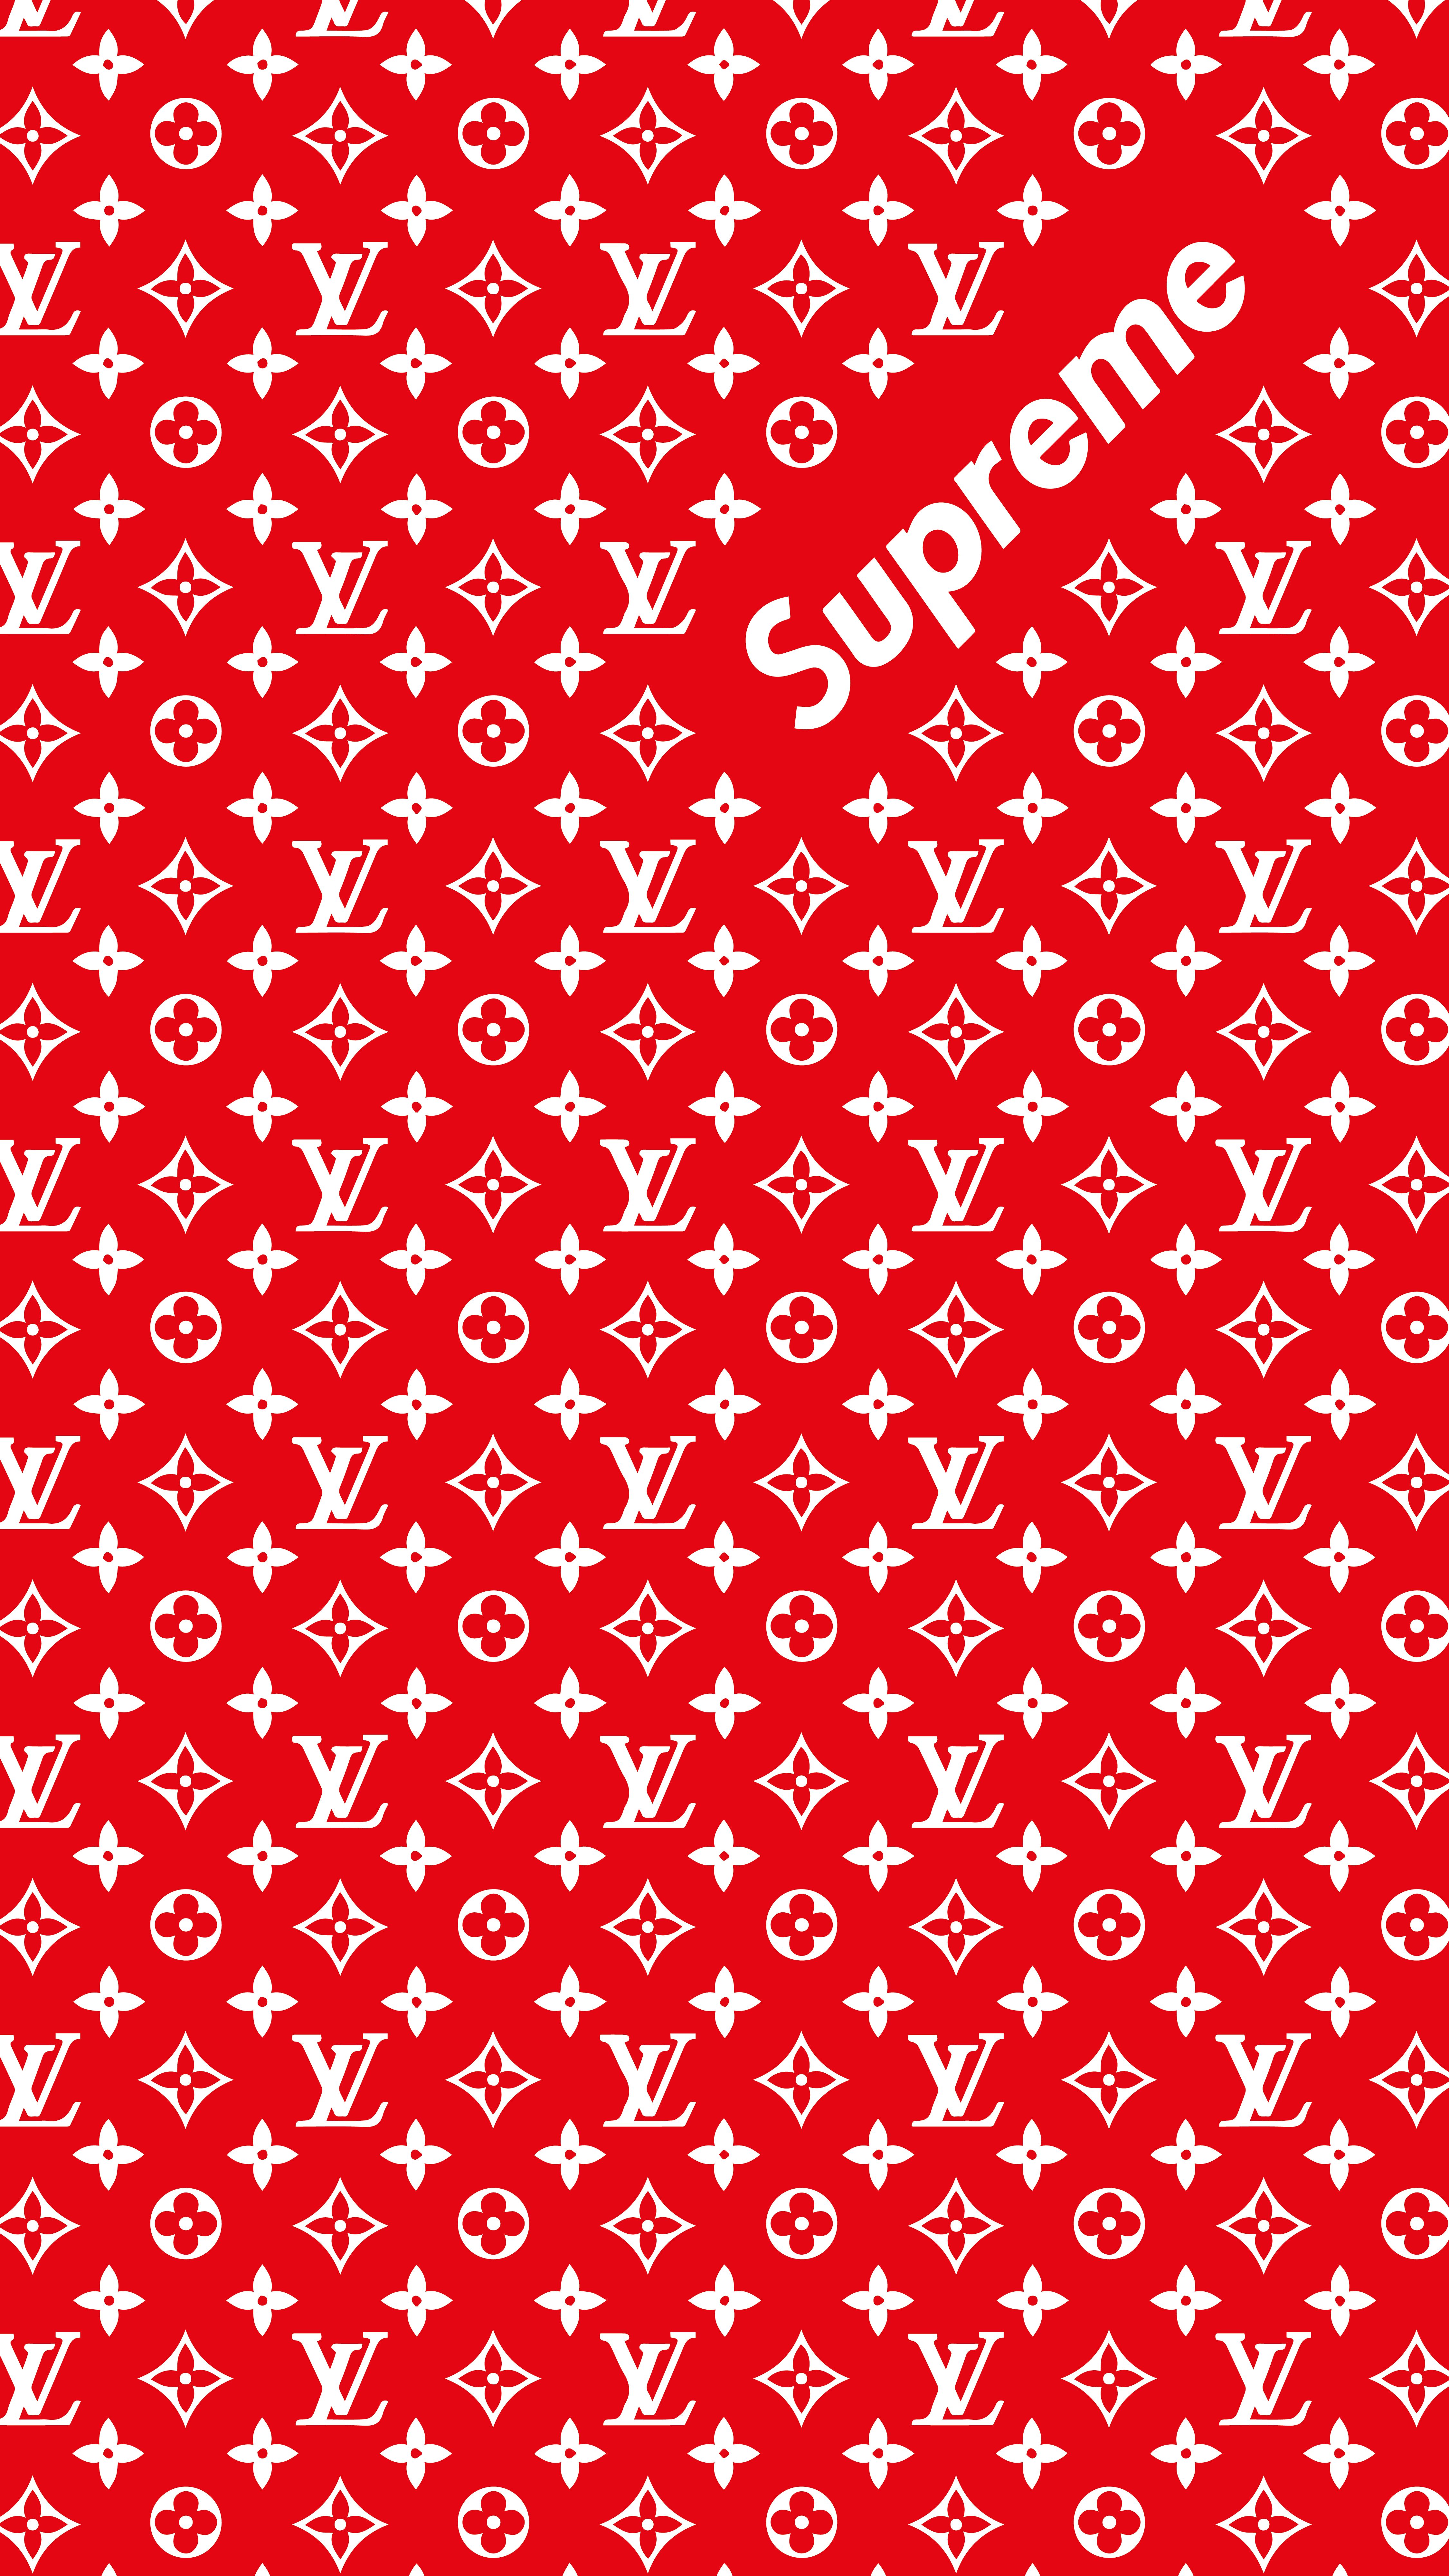 The supreme logo on a red background - Supreme